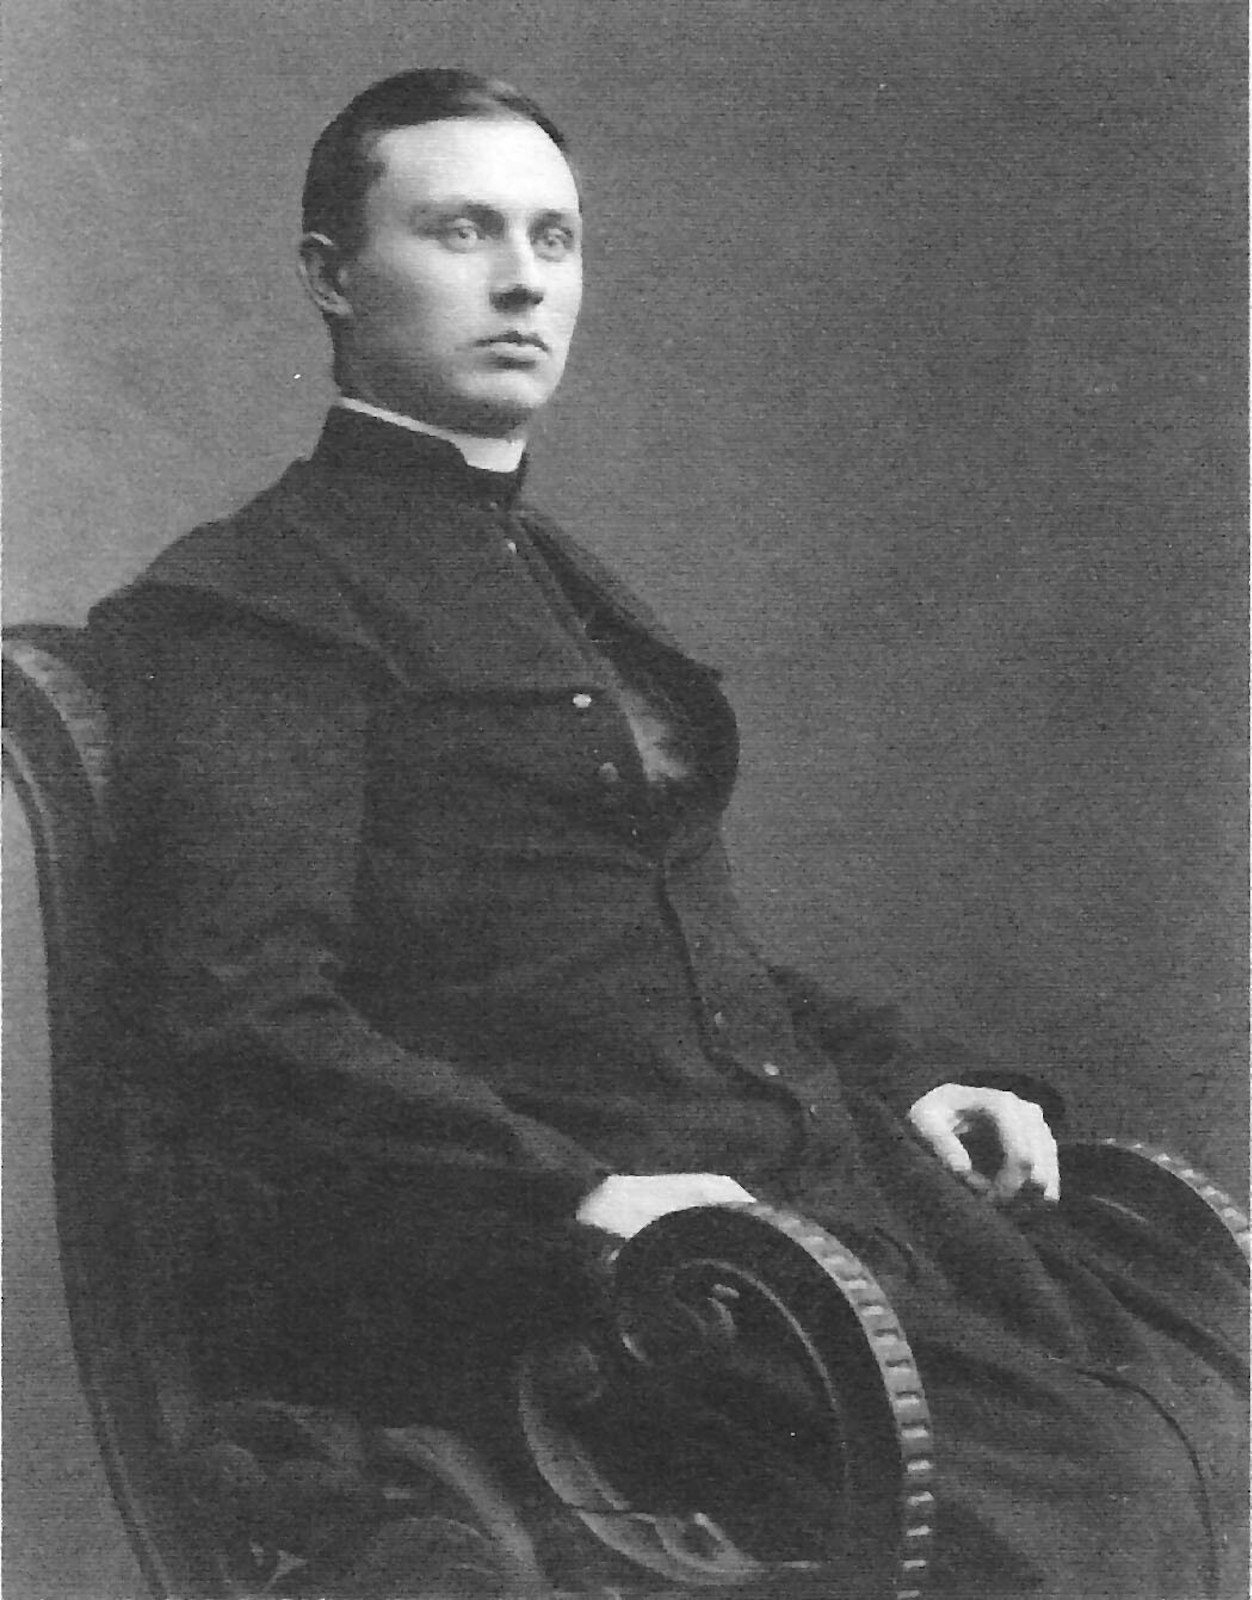 Blessed Michal Piaszczynski, a Polish priest killed in a Nazi concentration camp during World War II, is pictured in 1914 at the age of 29. Archbishop Russell learned of his relation to Blessed Piaszczynski from his paternal grandmother, who told the young Russell about her first cousin when he was discerning joining the seminary. "His story means a lot to me," Archbishop Russell told Detroit Catholic. (Lomzynska Kuria | Public domain photo)